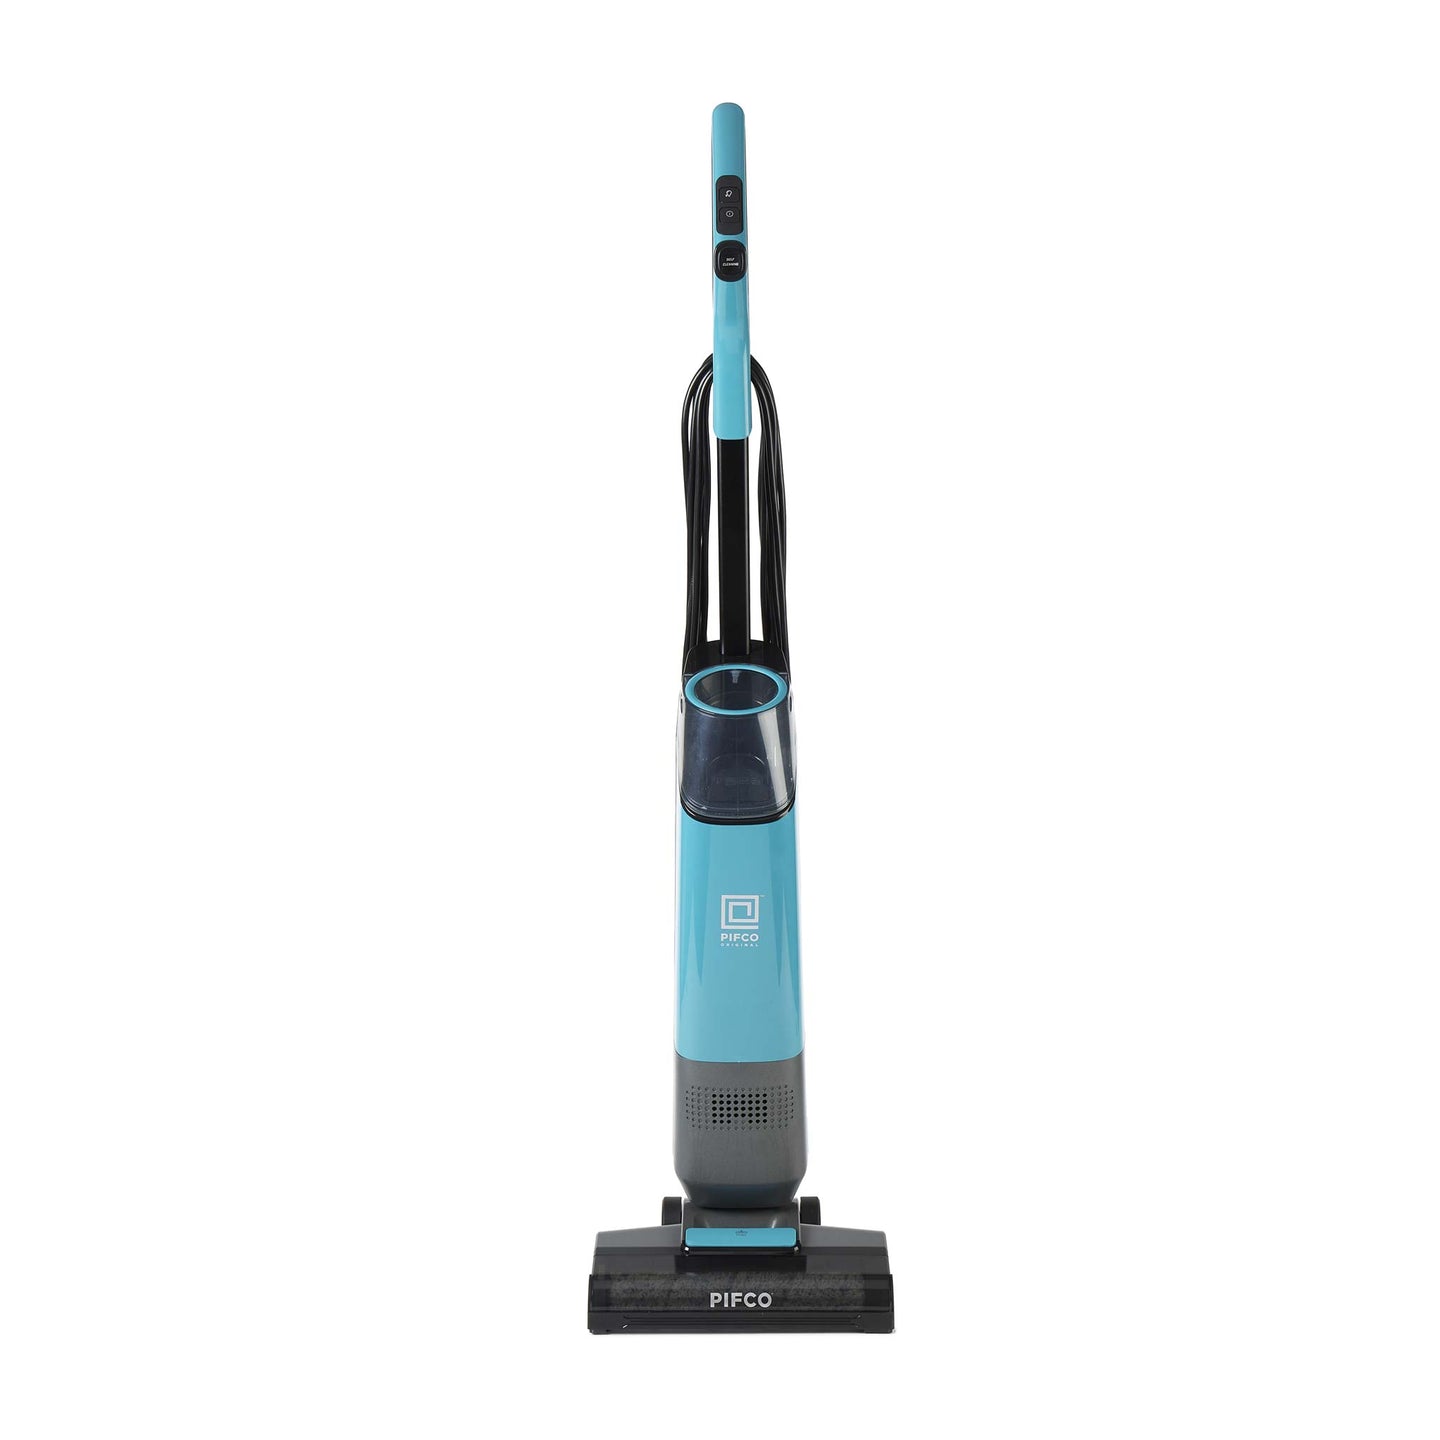 PIFCO 3 in 1 Multi Surface Cleaner